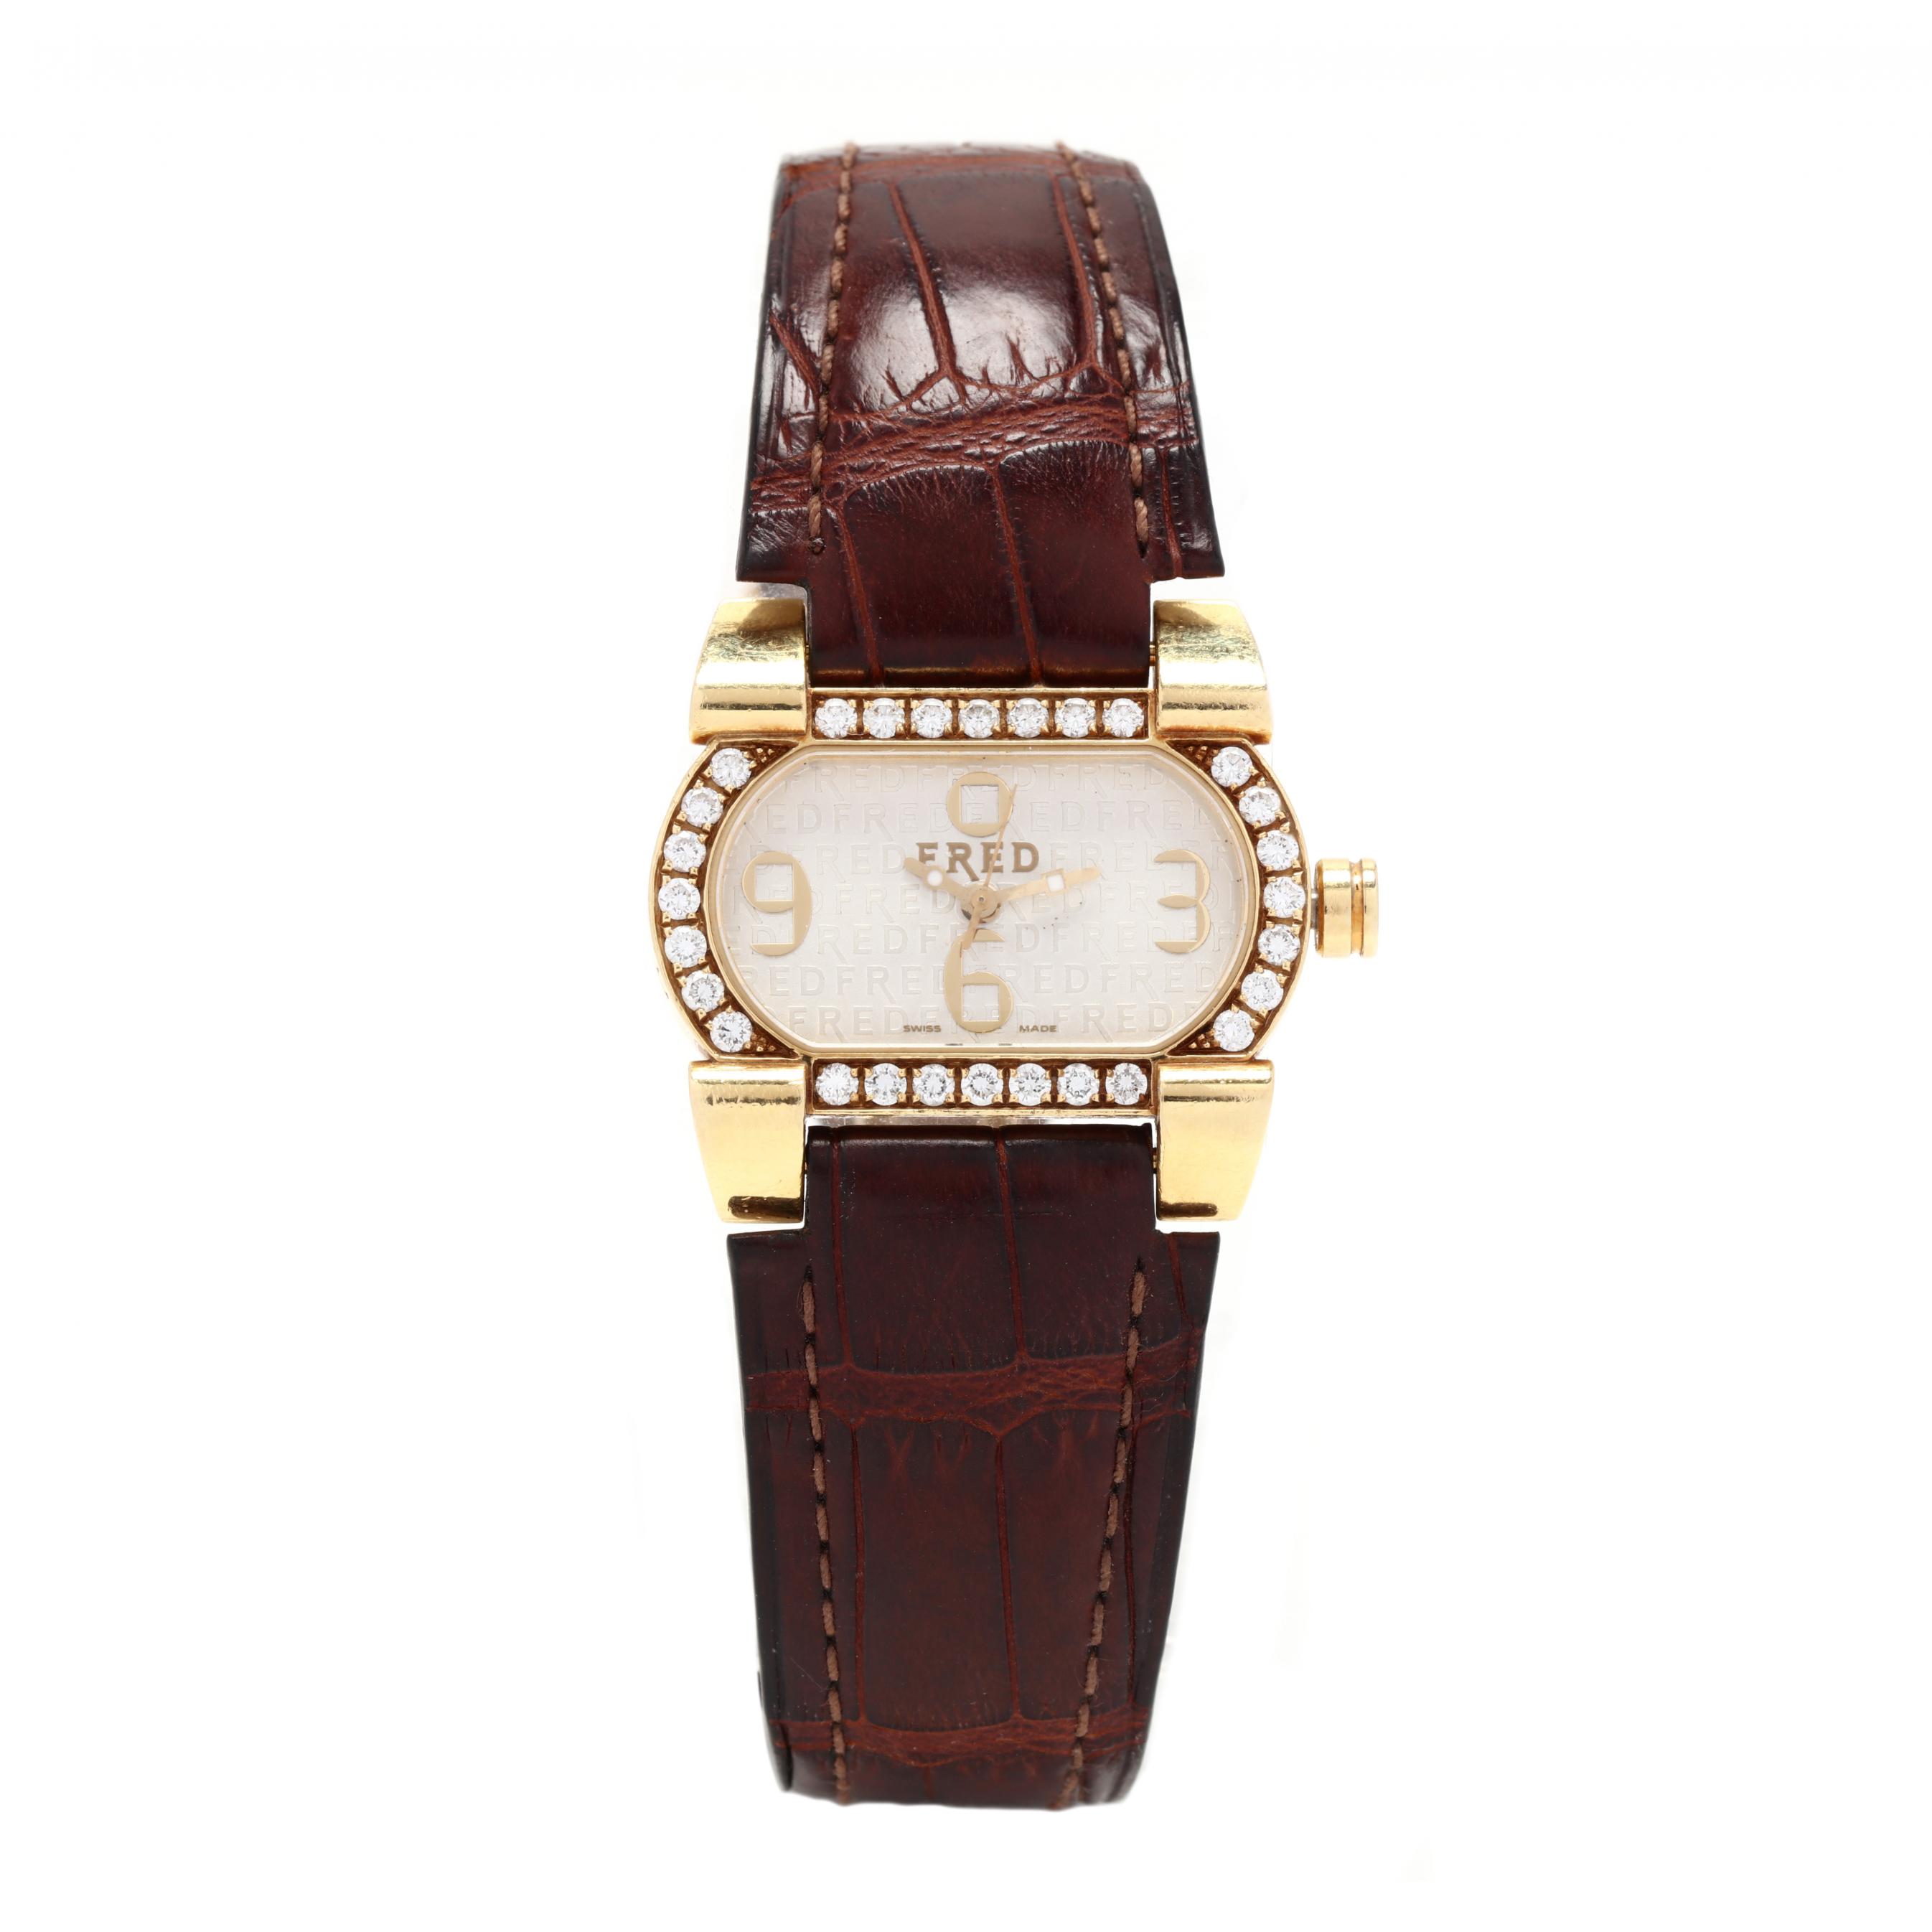 Lady's Gold Move One Watch, FRED (Lot 80 - Signature Spring 